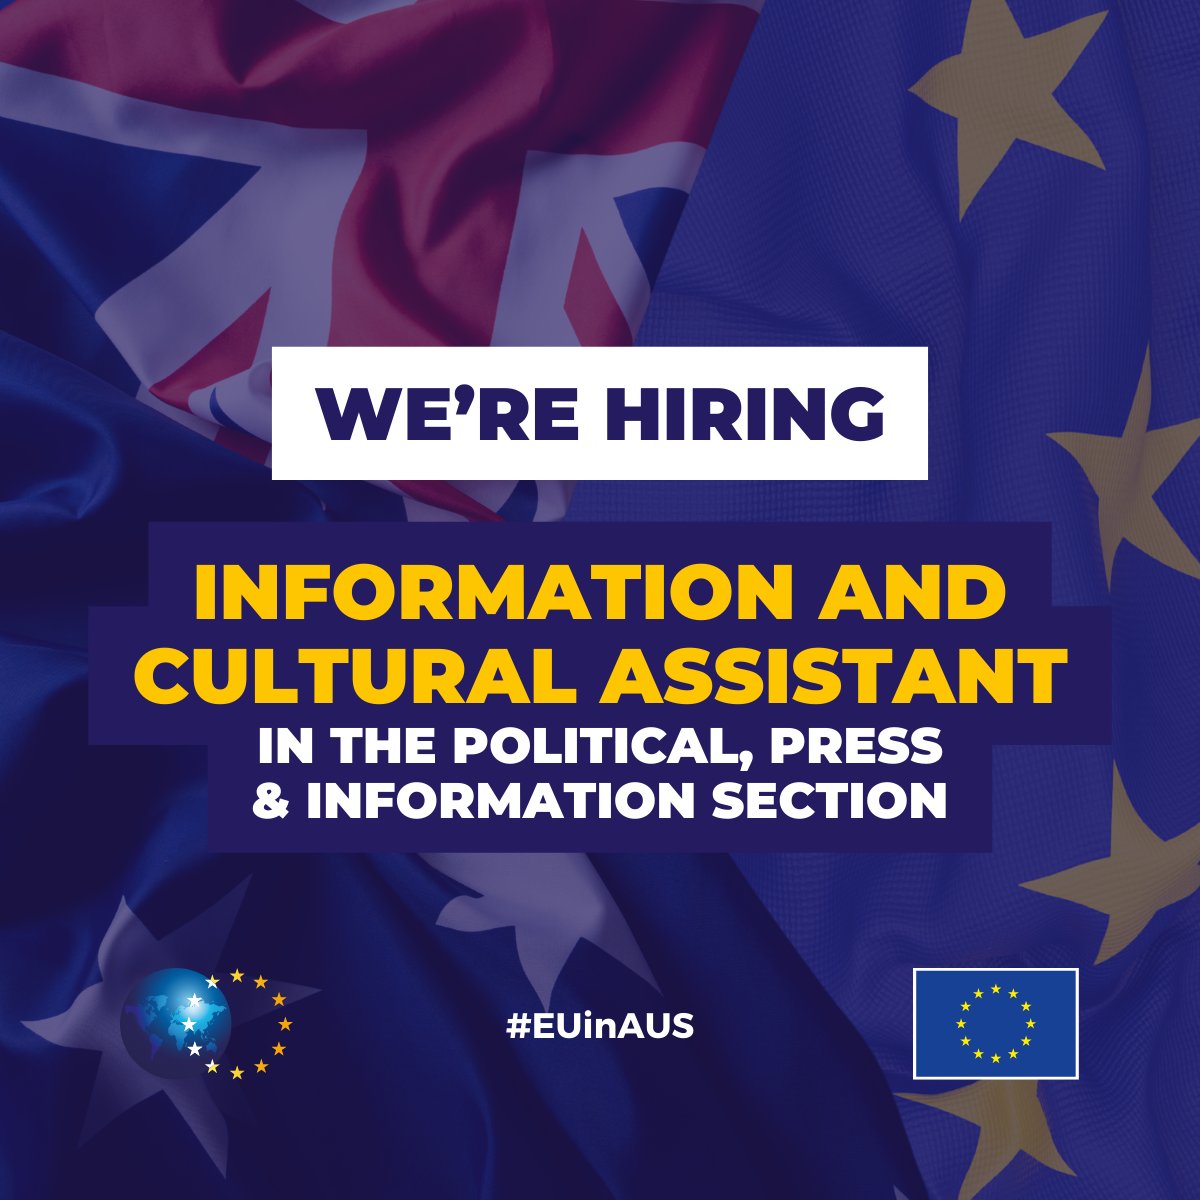 Are you passionate about cultural exchange and event coordination? 🇪🇺 The EU Delegation in #Canberra 🇦🇺 is looking for a dynamic 𝗜𝗻𝗳𝗼𝗿𝗺𝗮𝘁𝗶𝗼𝗻 𝗮𝗻𝗱 𝗖𝘂𝗹𝘁𝘂𝗿𝗮𝗹 𝗔𝘀𝘀𝗶𝘀𝘁𝗮𝗻𝘁 to join our team. Read more about this opportunity: eeas.europa.eu/delegations/au…